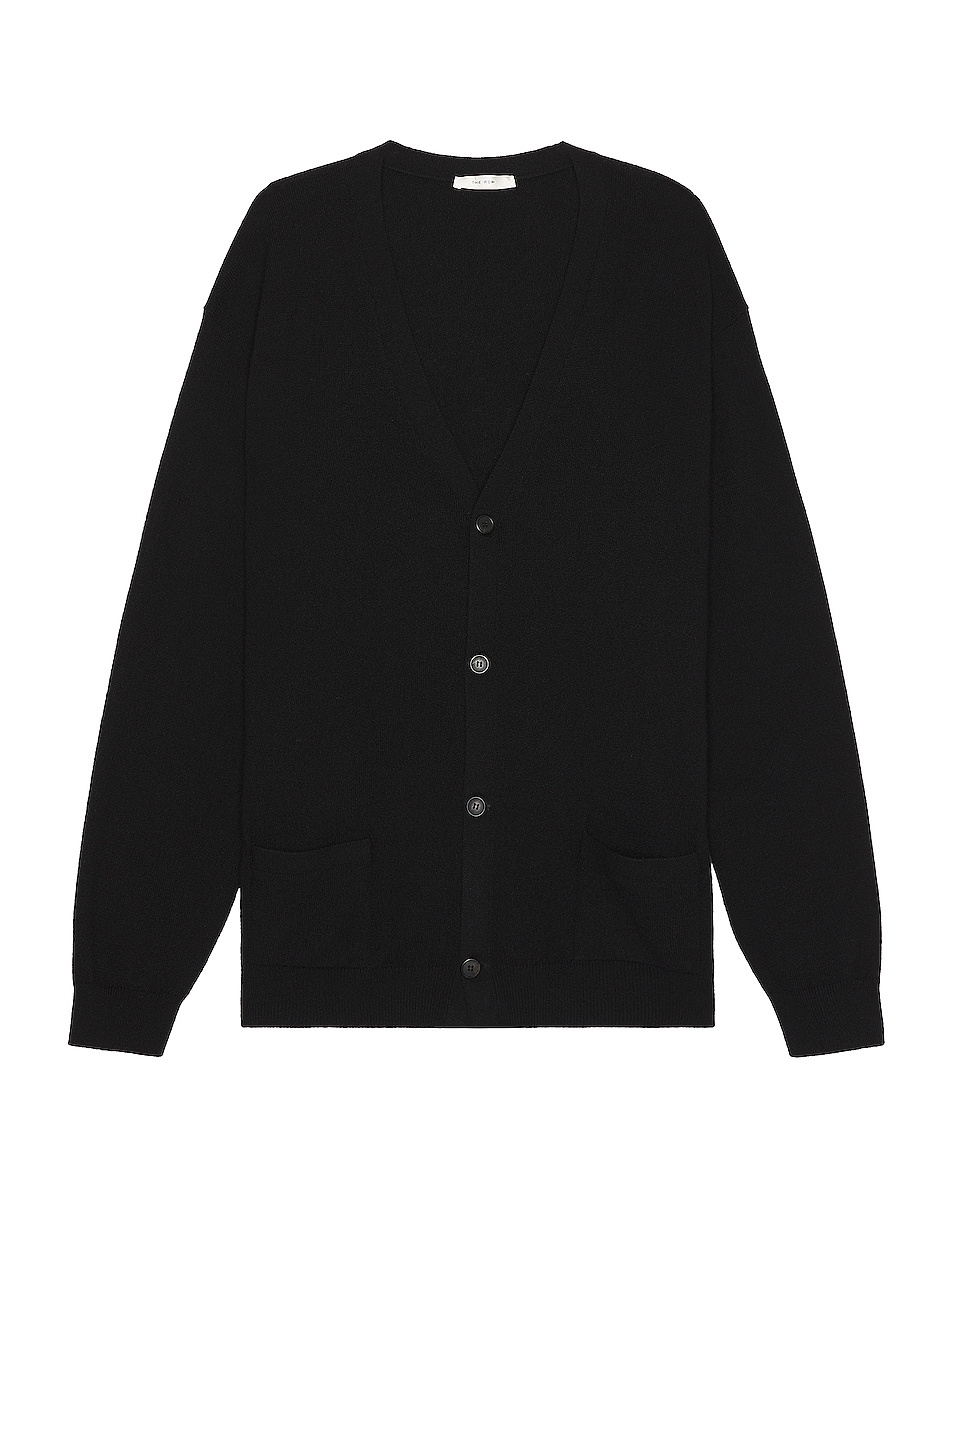 Image 1 of The Row Hamish Cardigan in Black